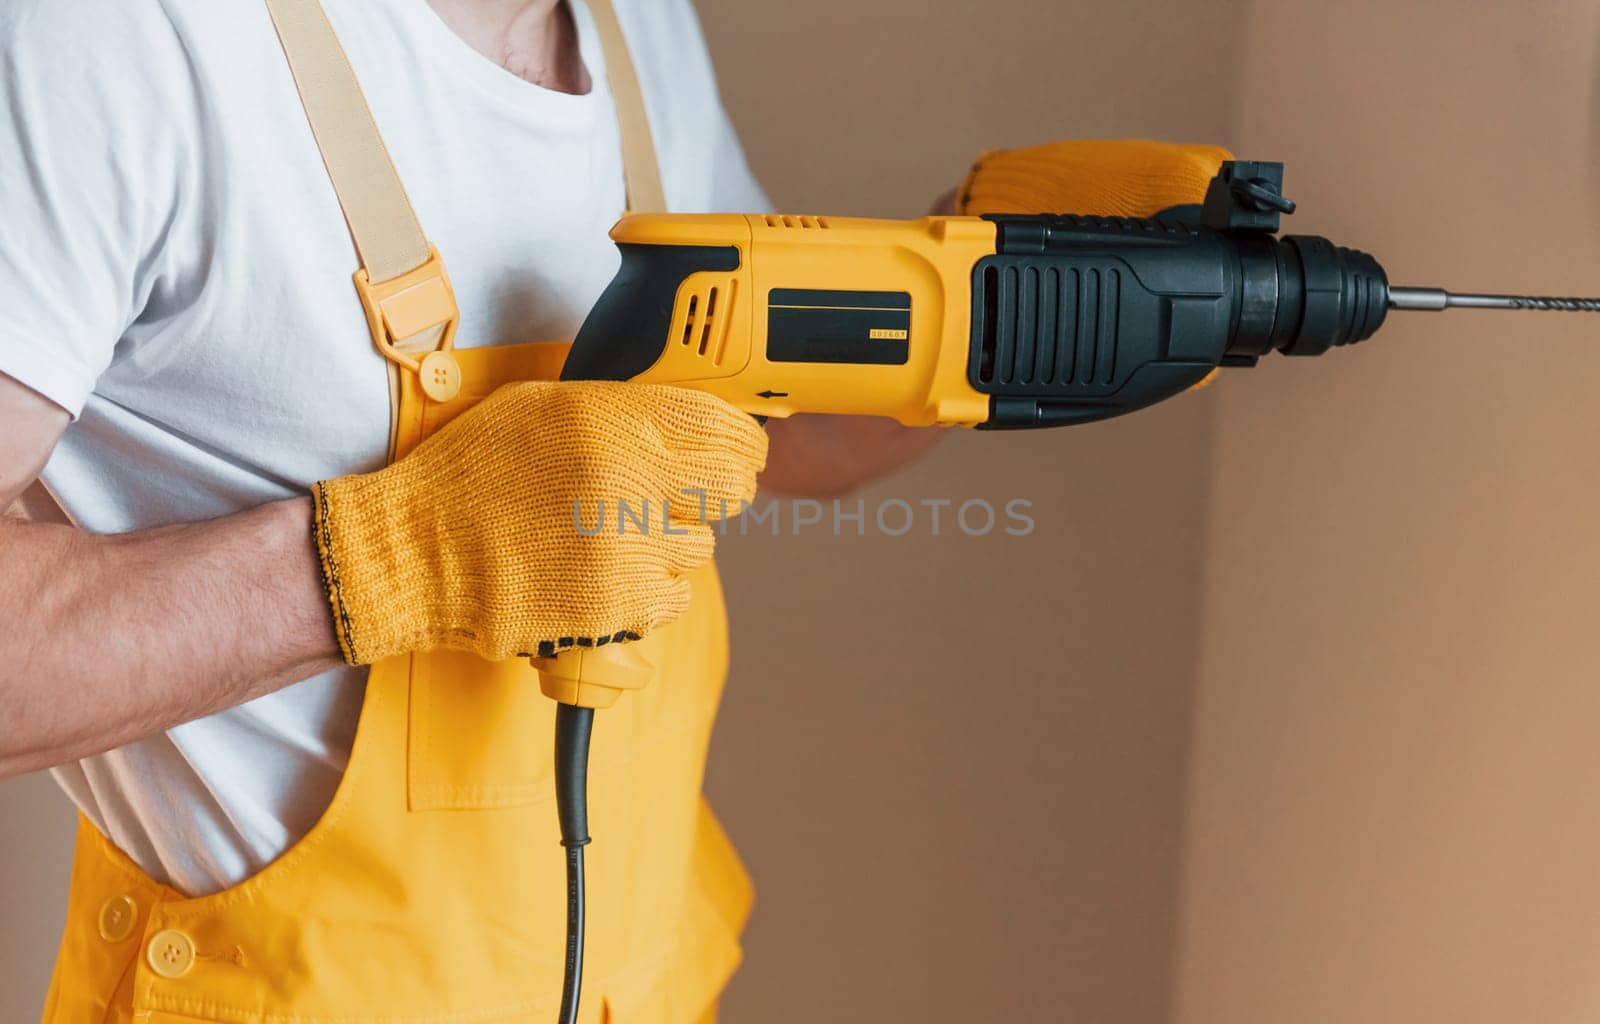 Handyman in yellow uniform works indoors by using hammer drill. House renovation conception.